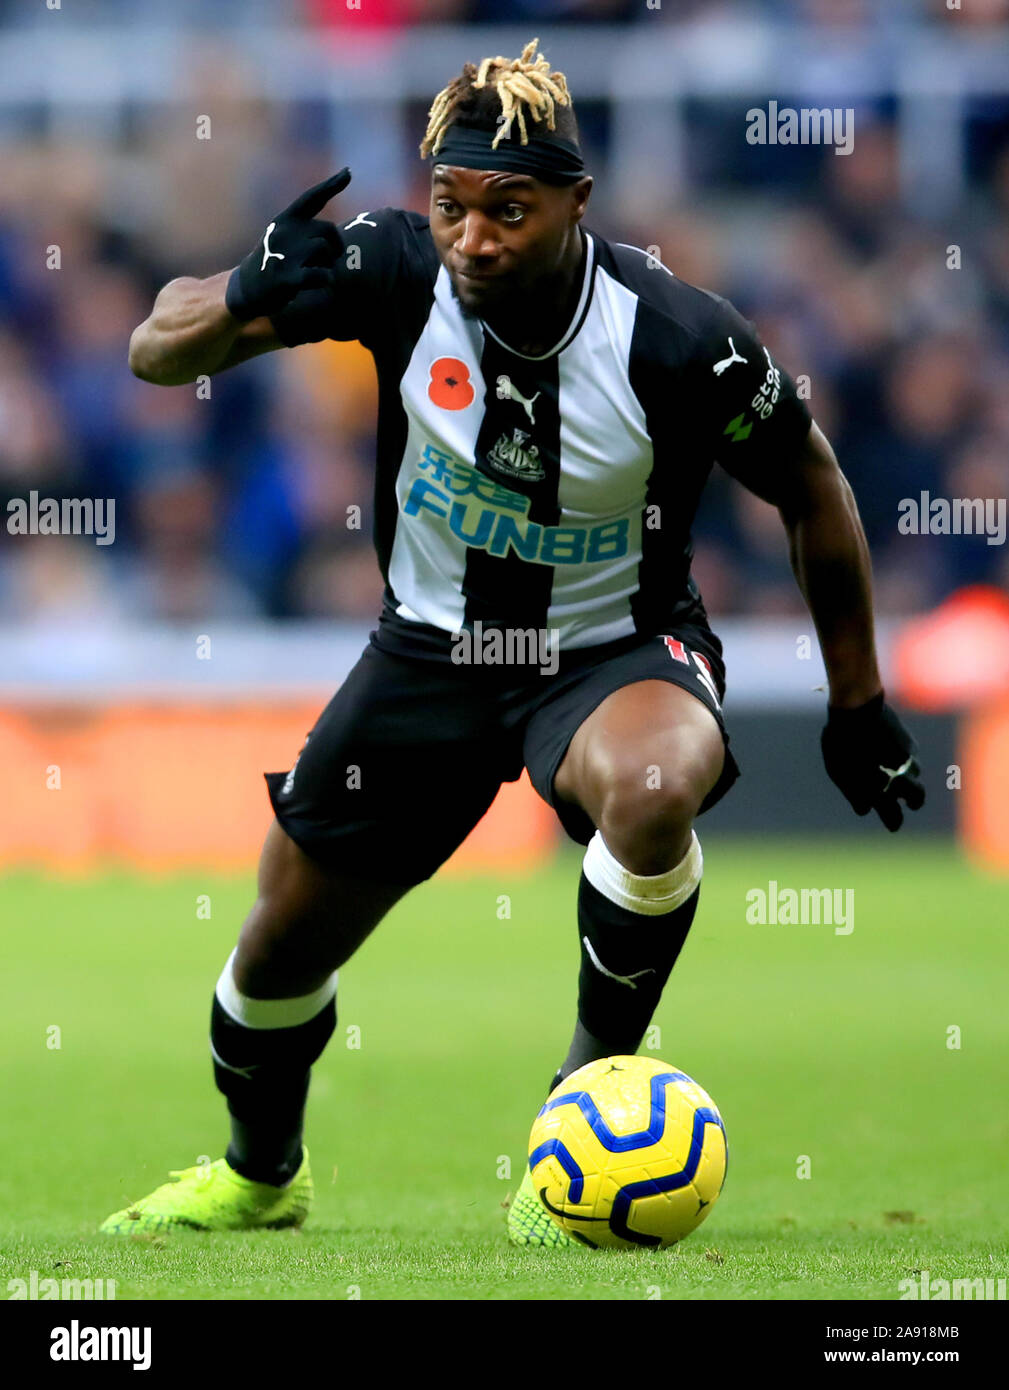 Newcastle United's Allan Saint-Maximin in action during the Premier League  match at St James' Park, Newcastle Stock Photo - Alamy